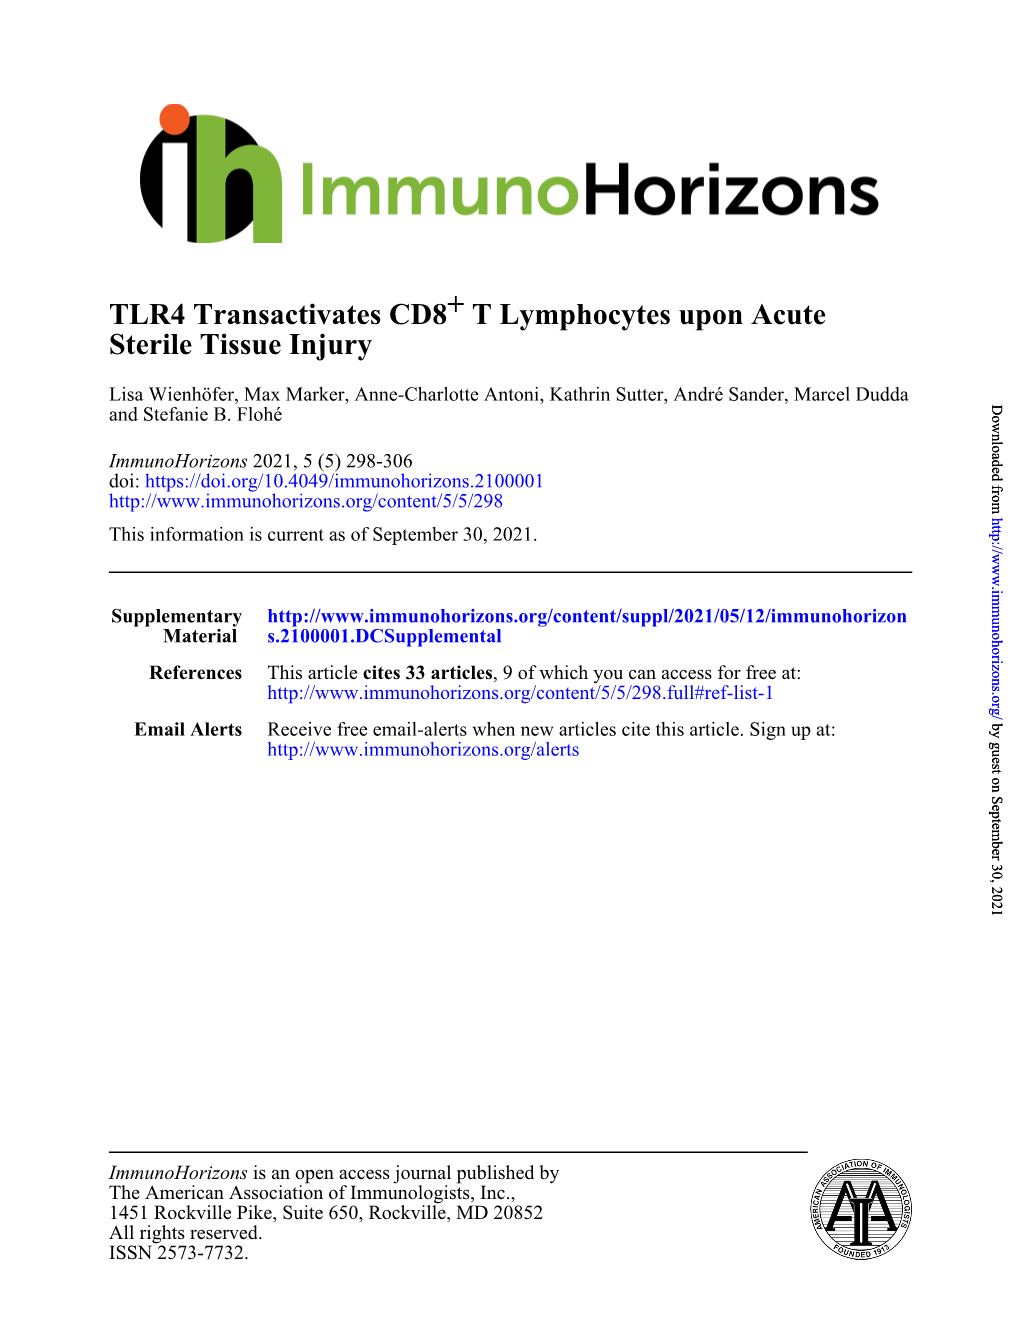 Sterile Tissue Injury T Lymphocytes Upon Acute + TLR4 Transactivates